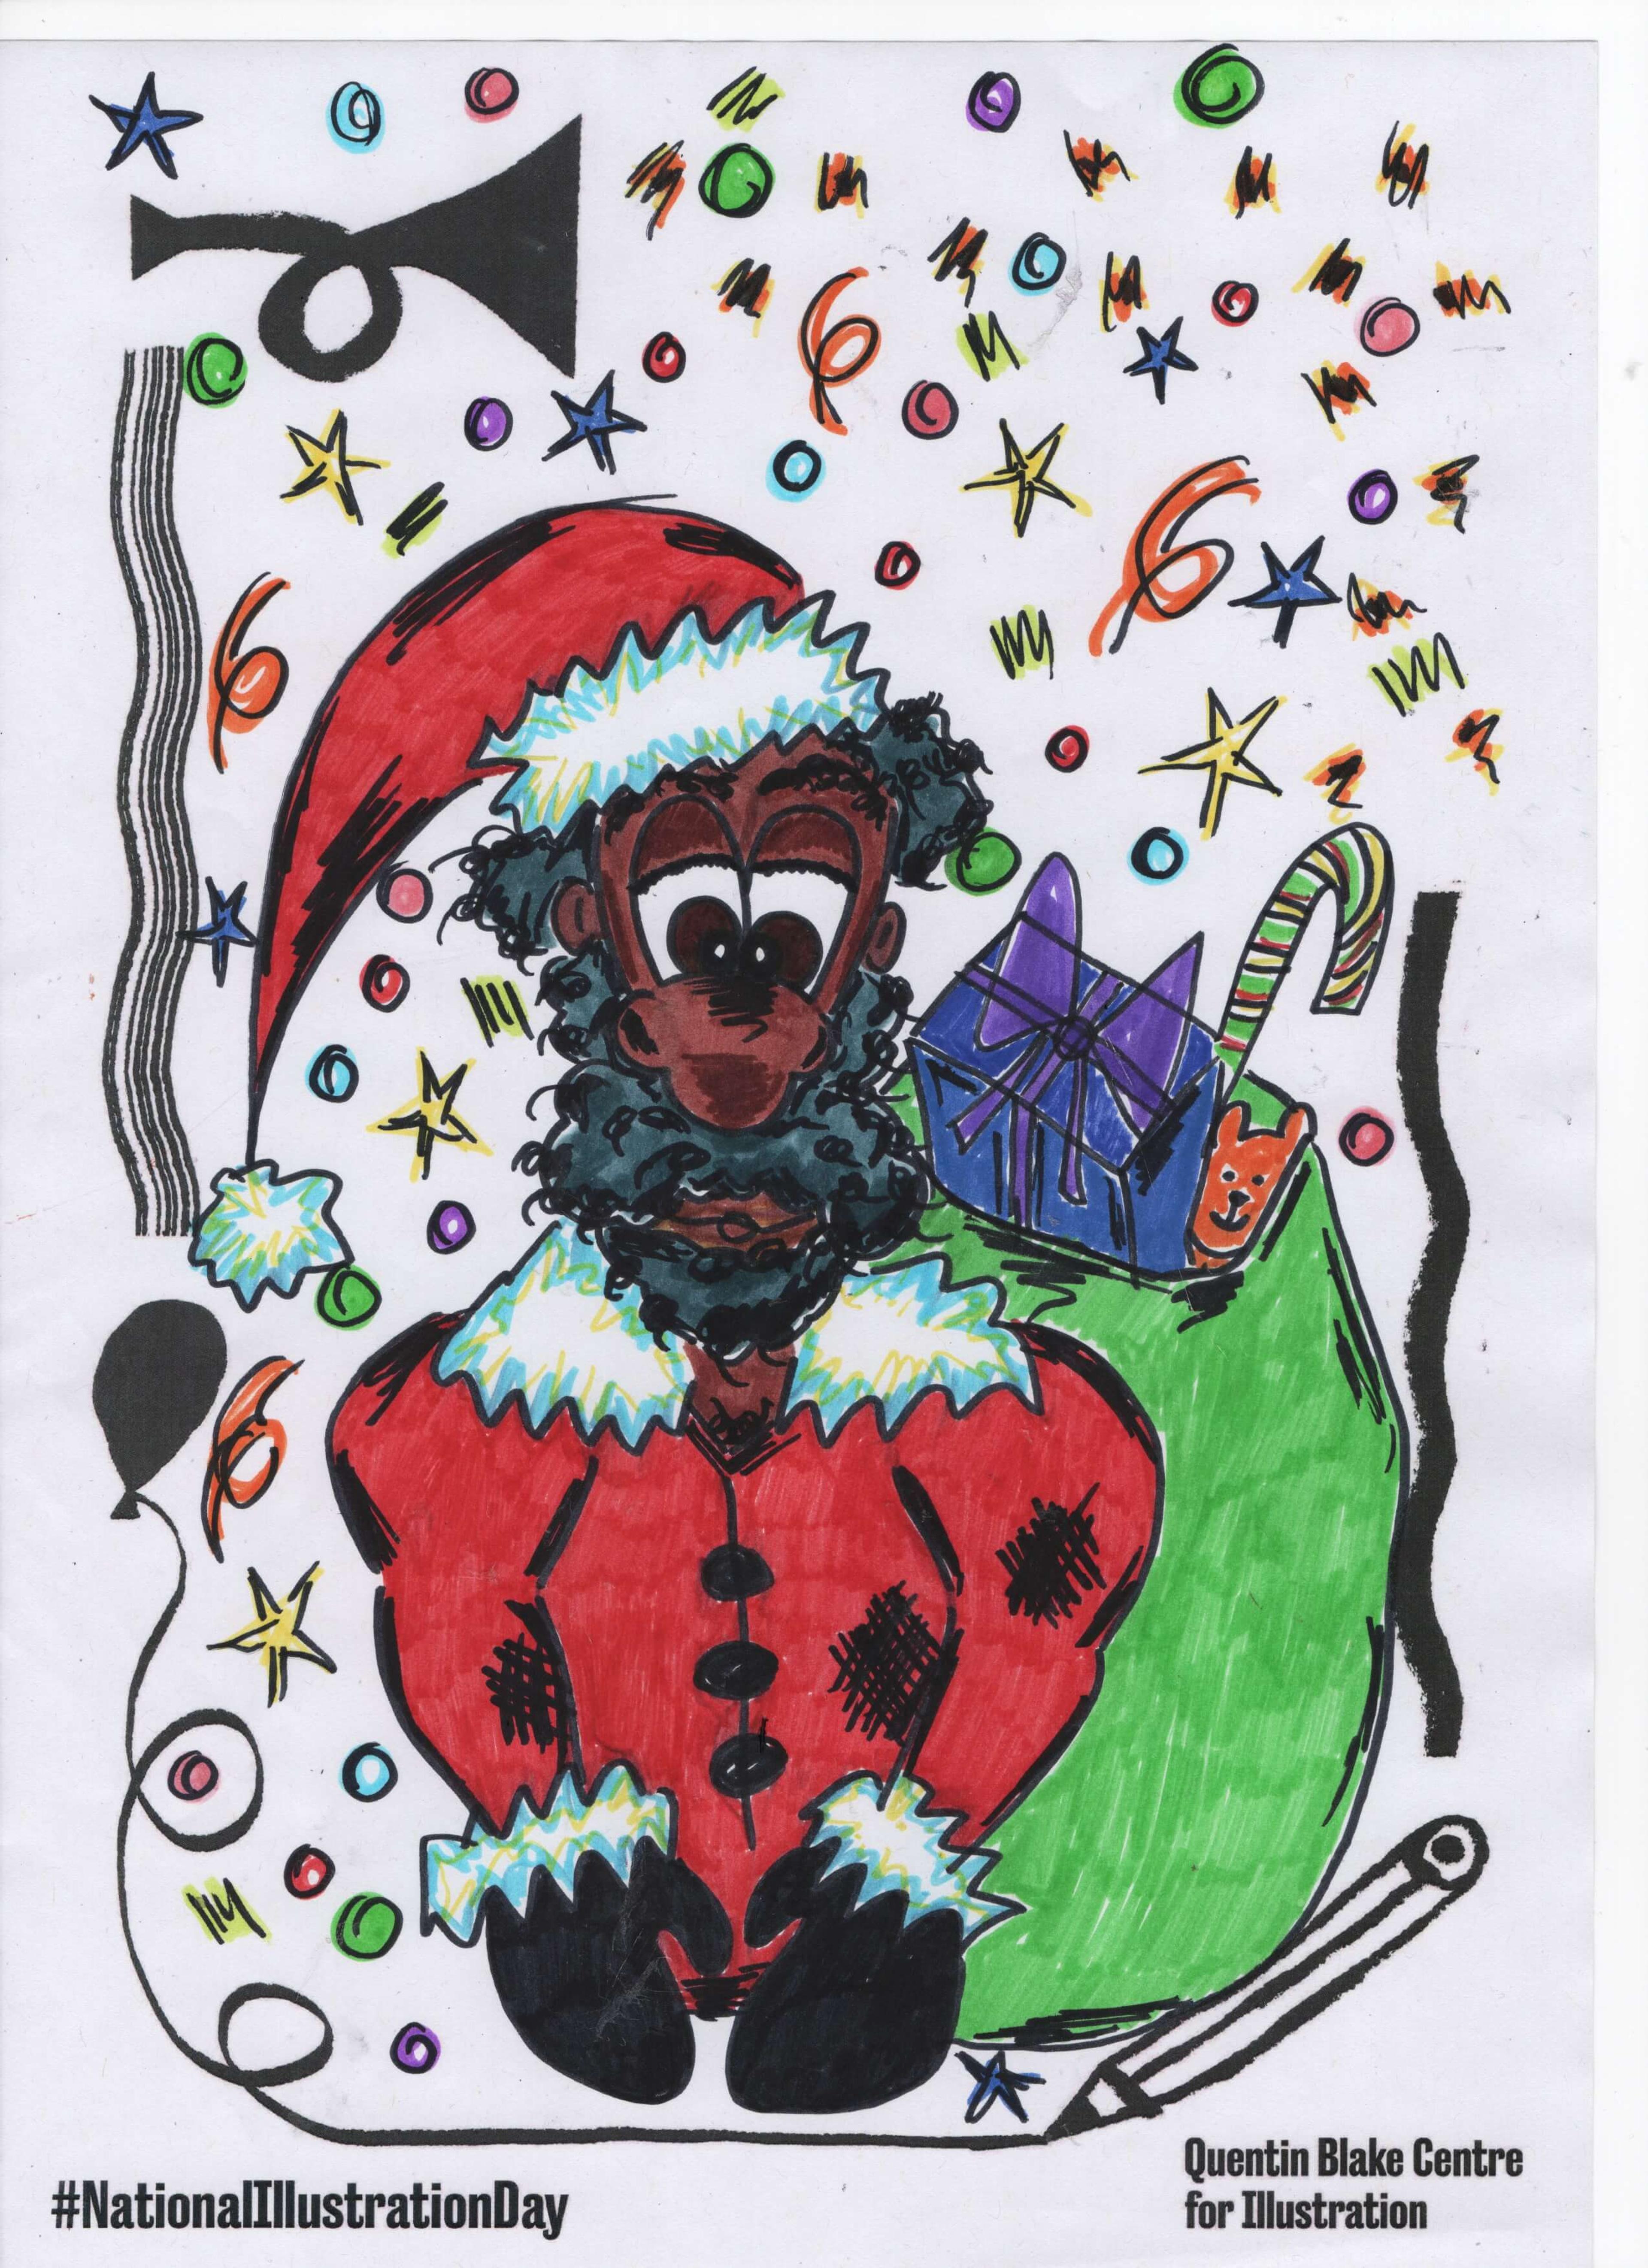 Cartoon of Santa Clause with confetti falling all around. 